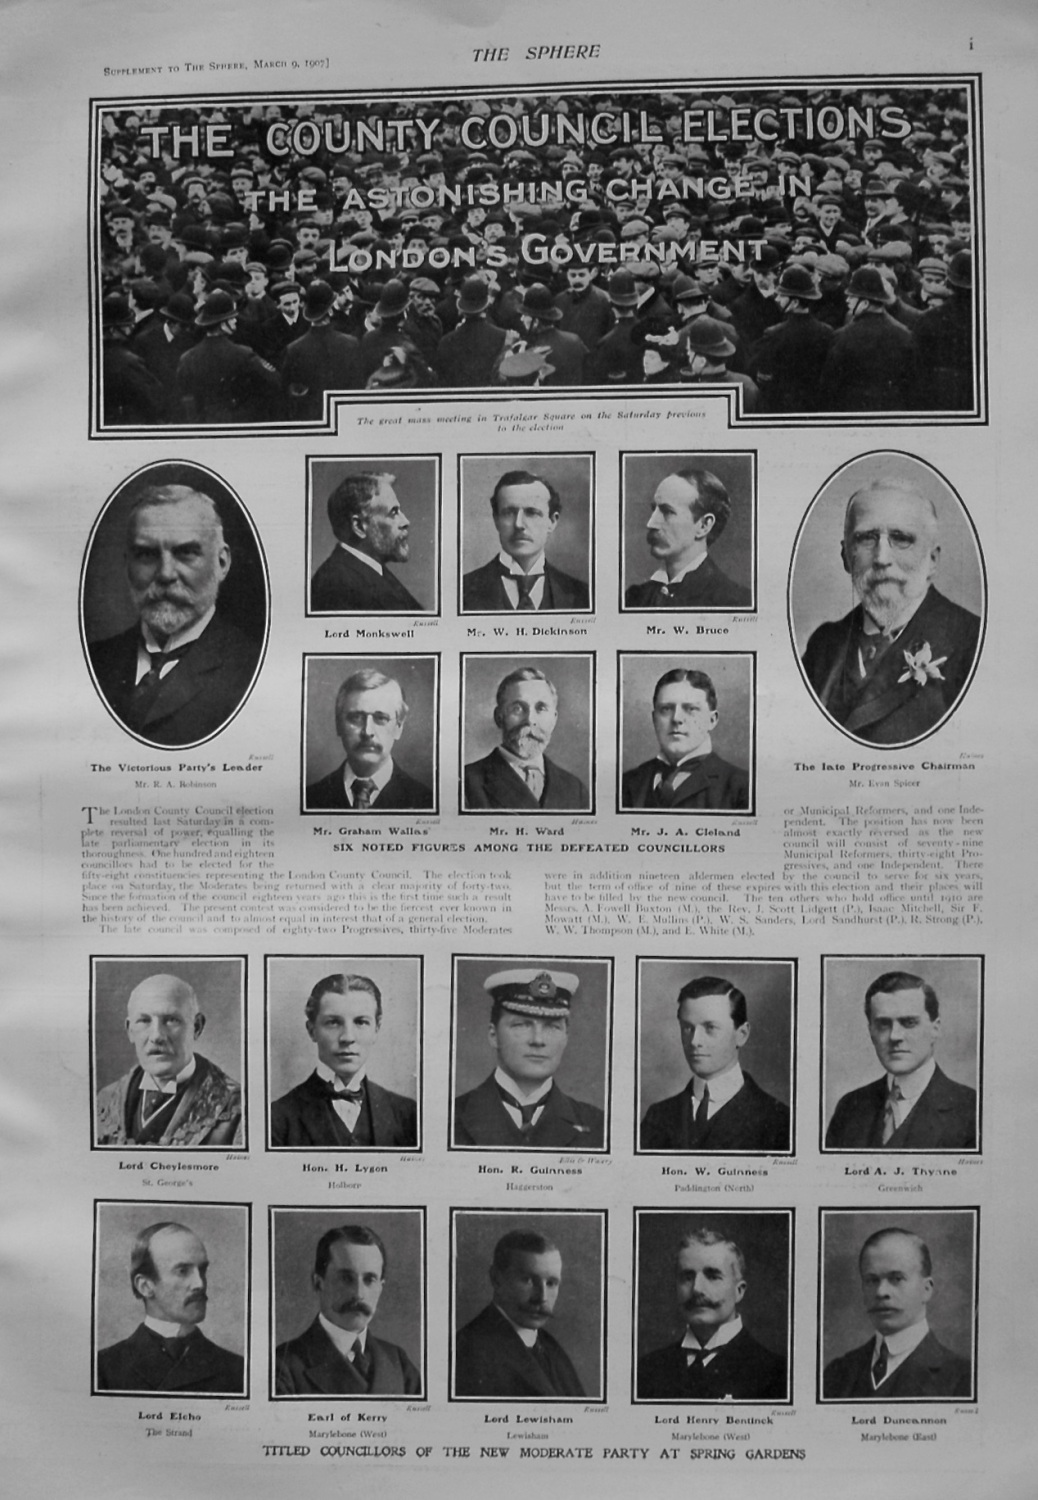 County Council Elections The Astonishing Change in London's Government. 190